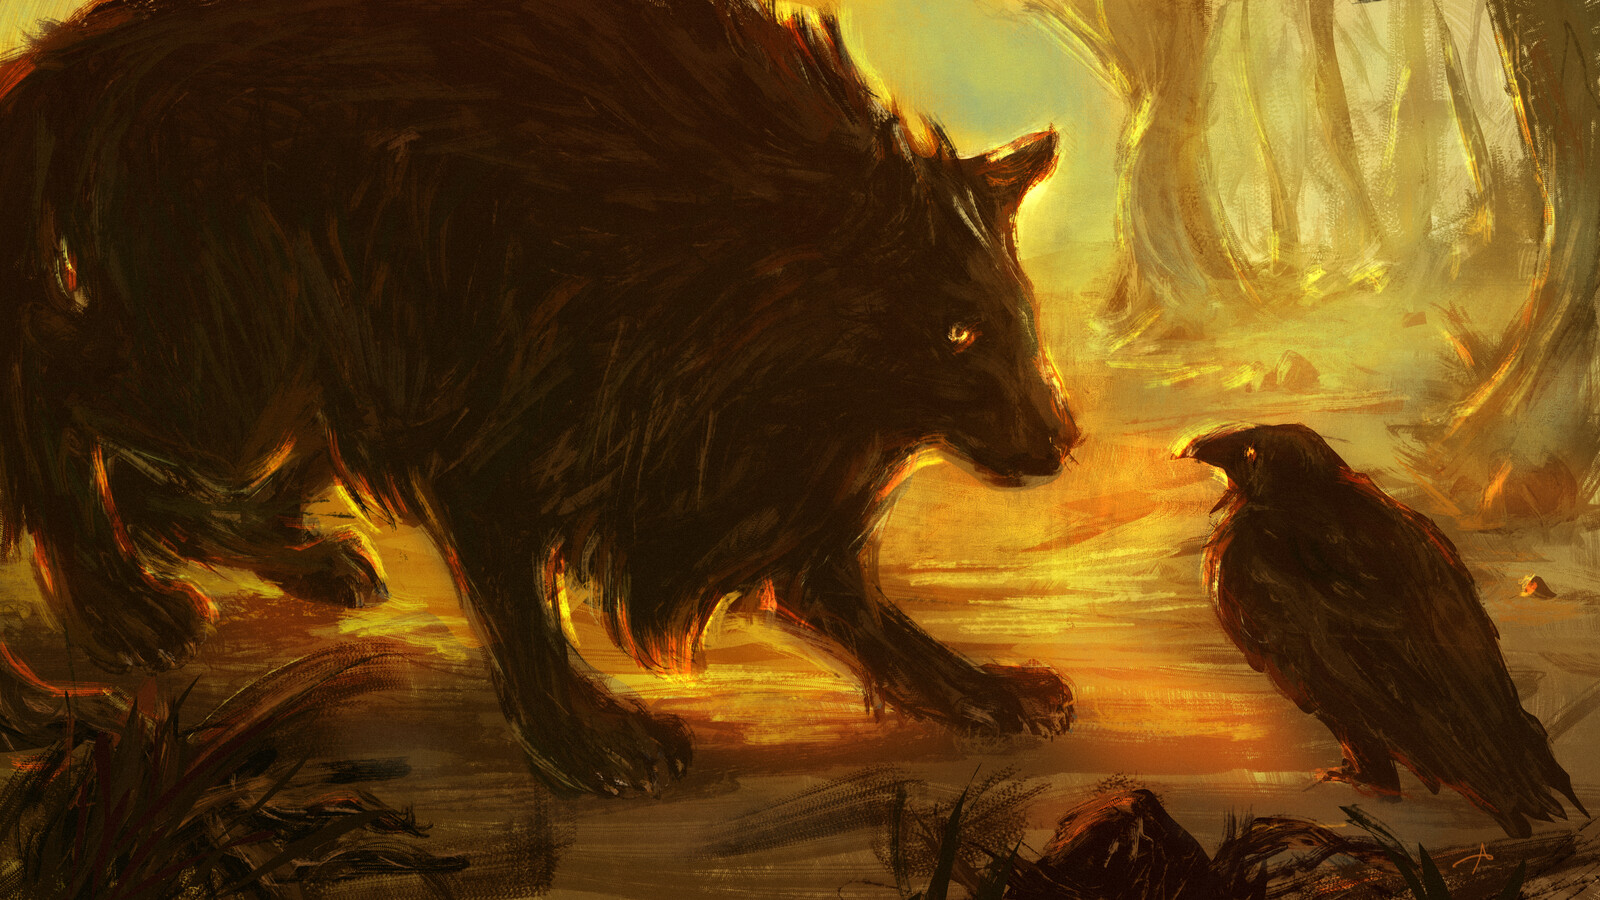 BETWEEN A WOLF AND A RAVEN